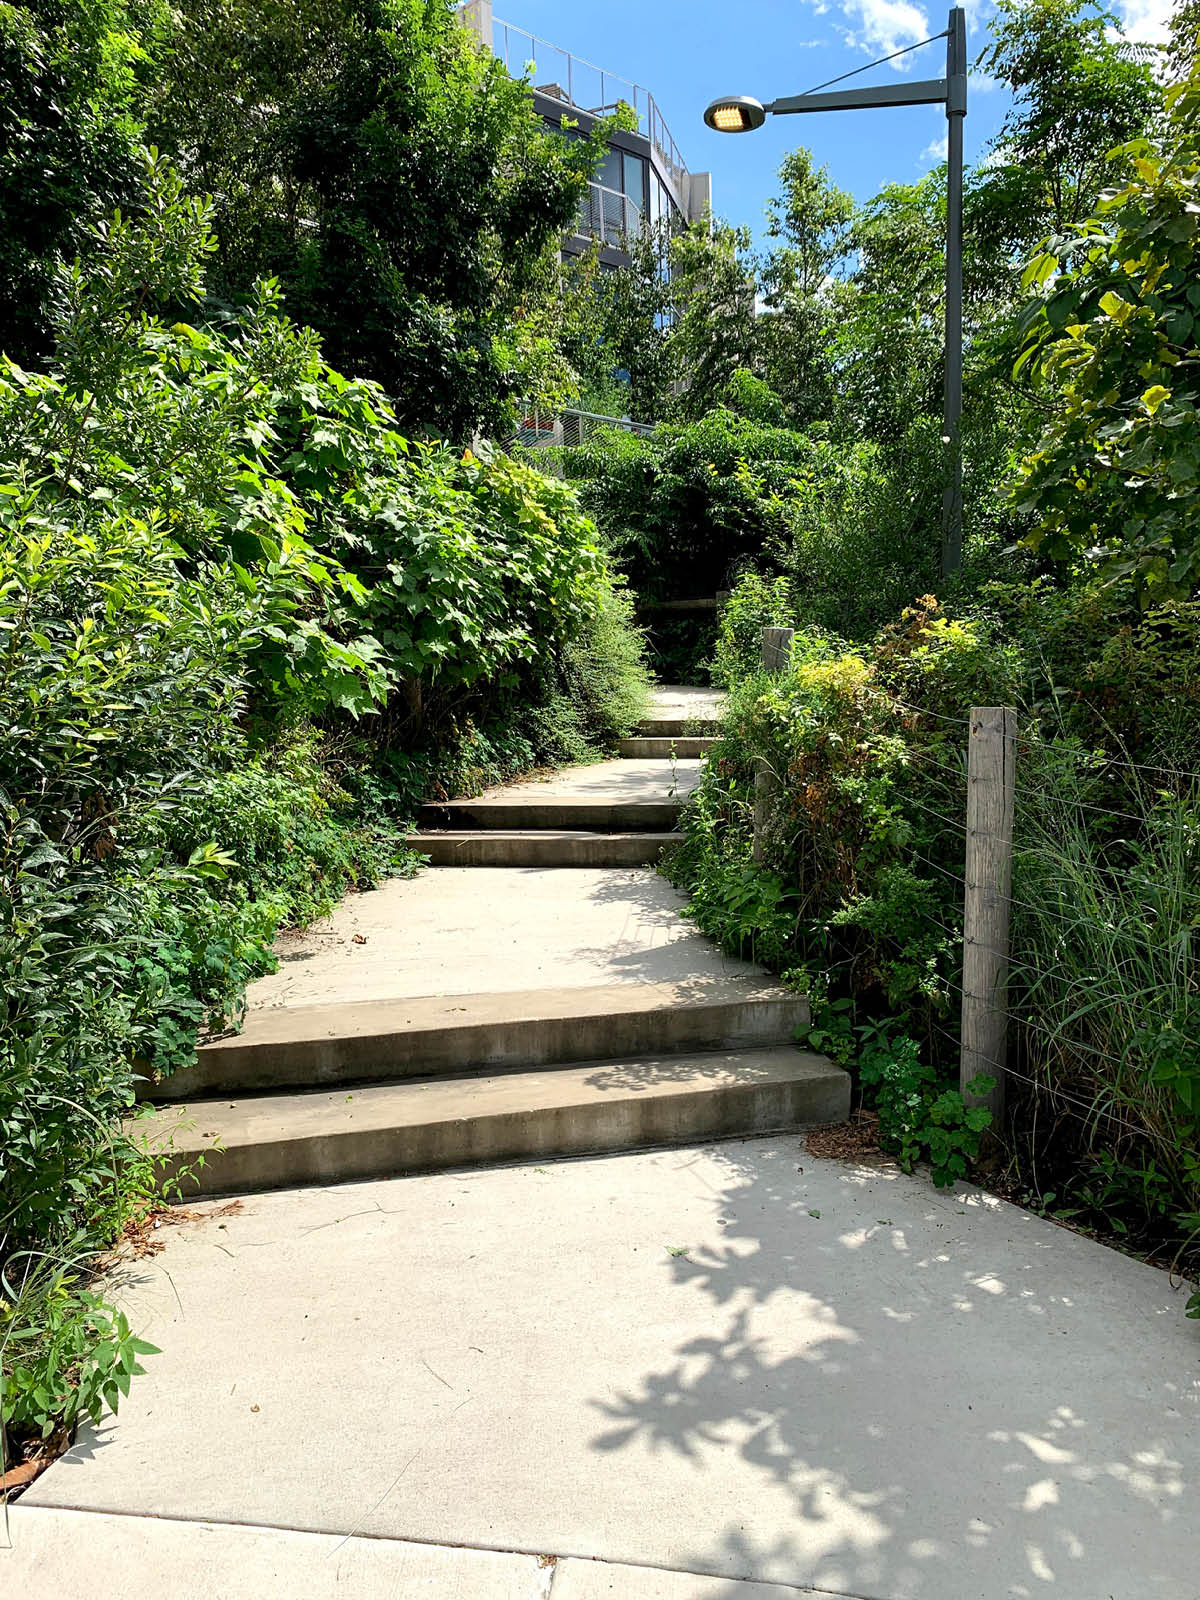 Steps up through bushes and trees on a sunny day.